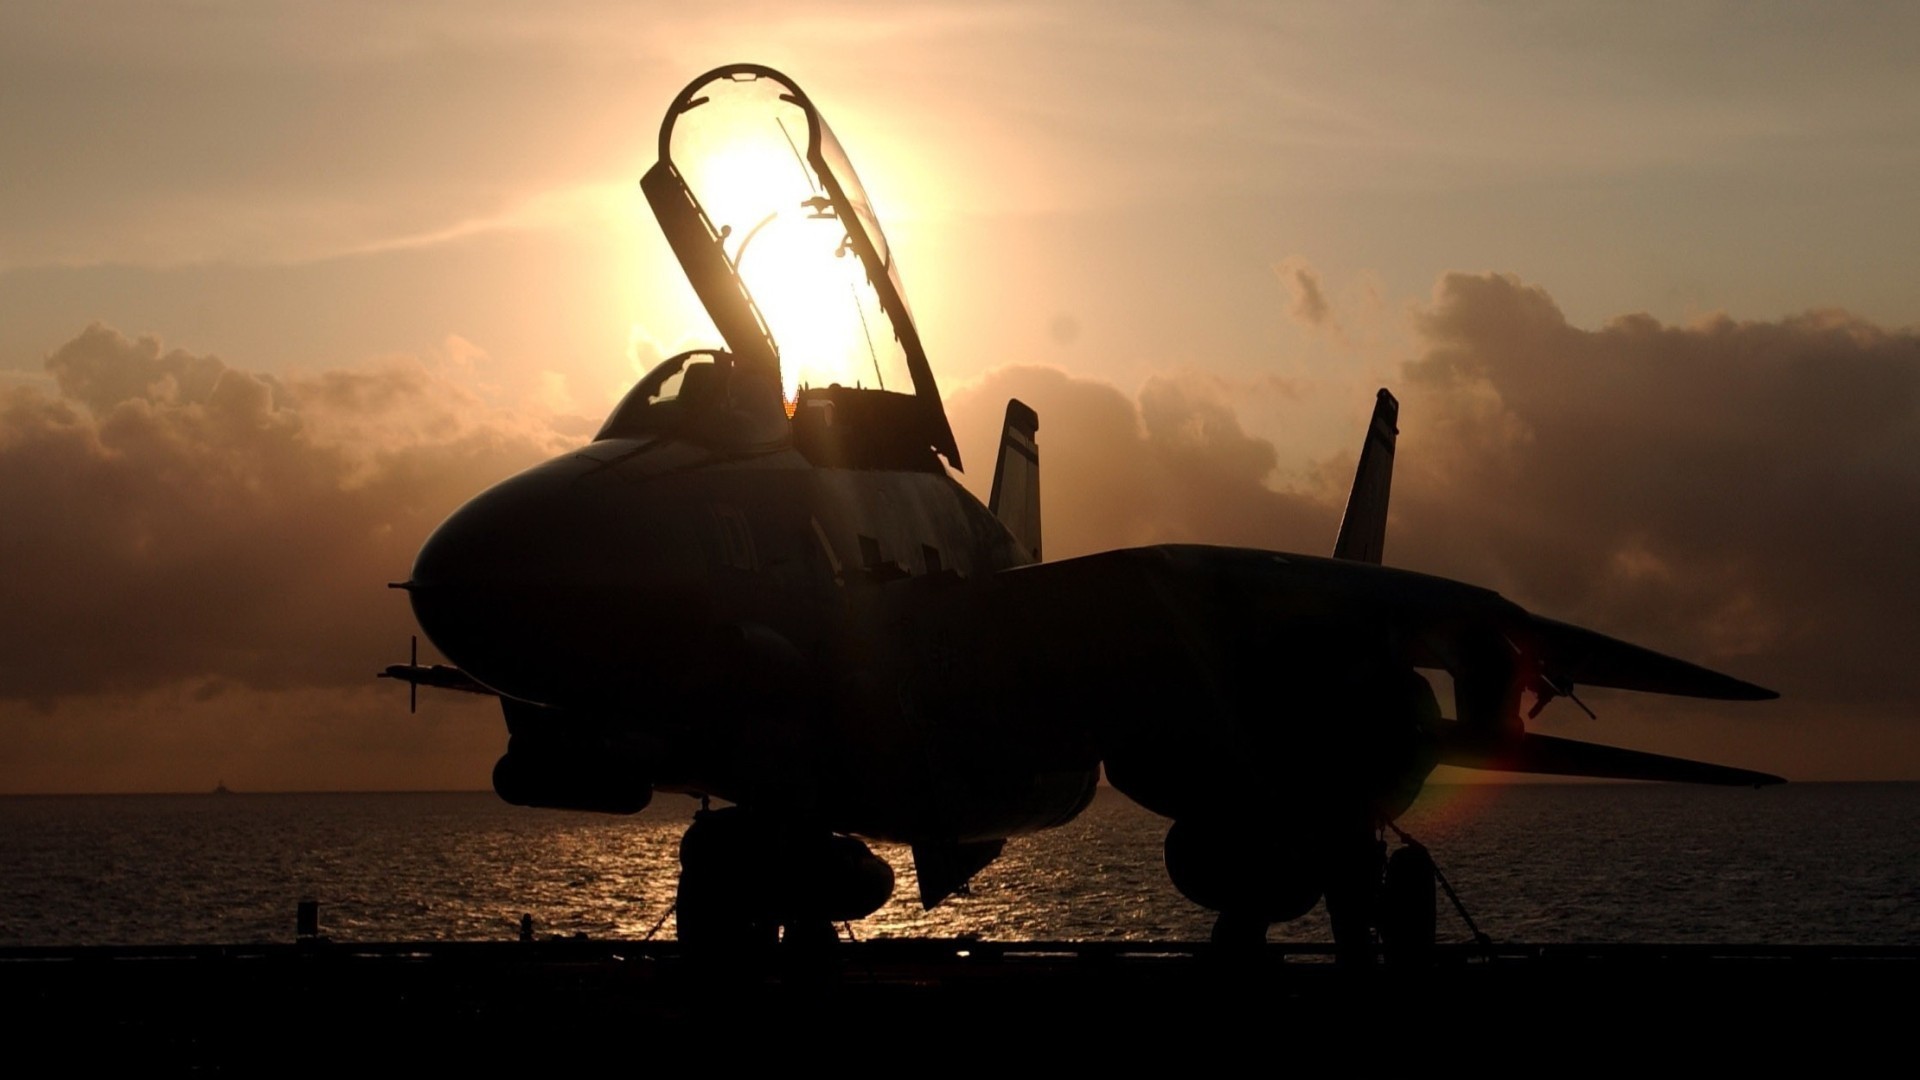 1920x1080 F14 tomcat aircraft carriers fighter jets military wallpaper